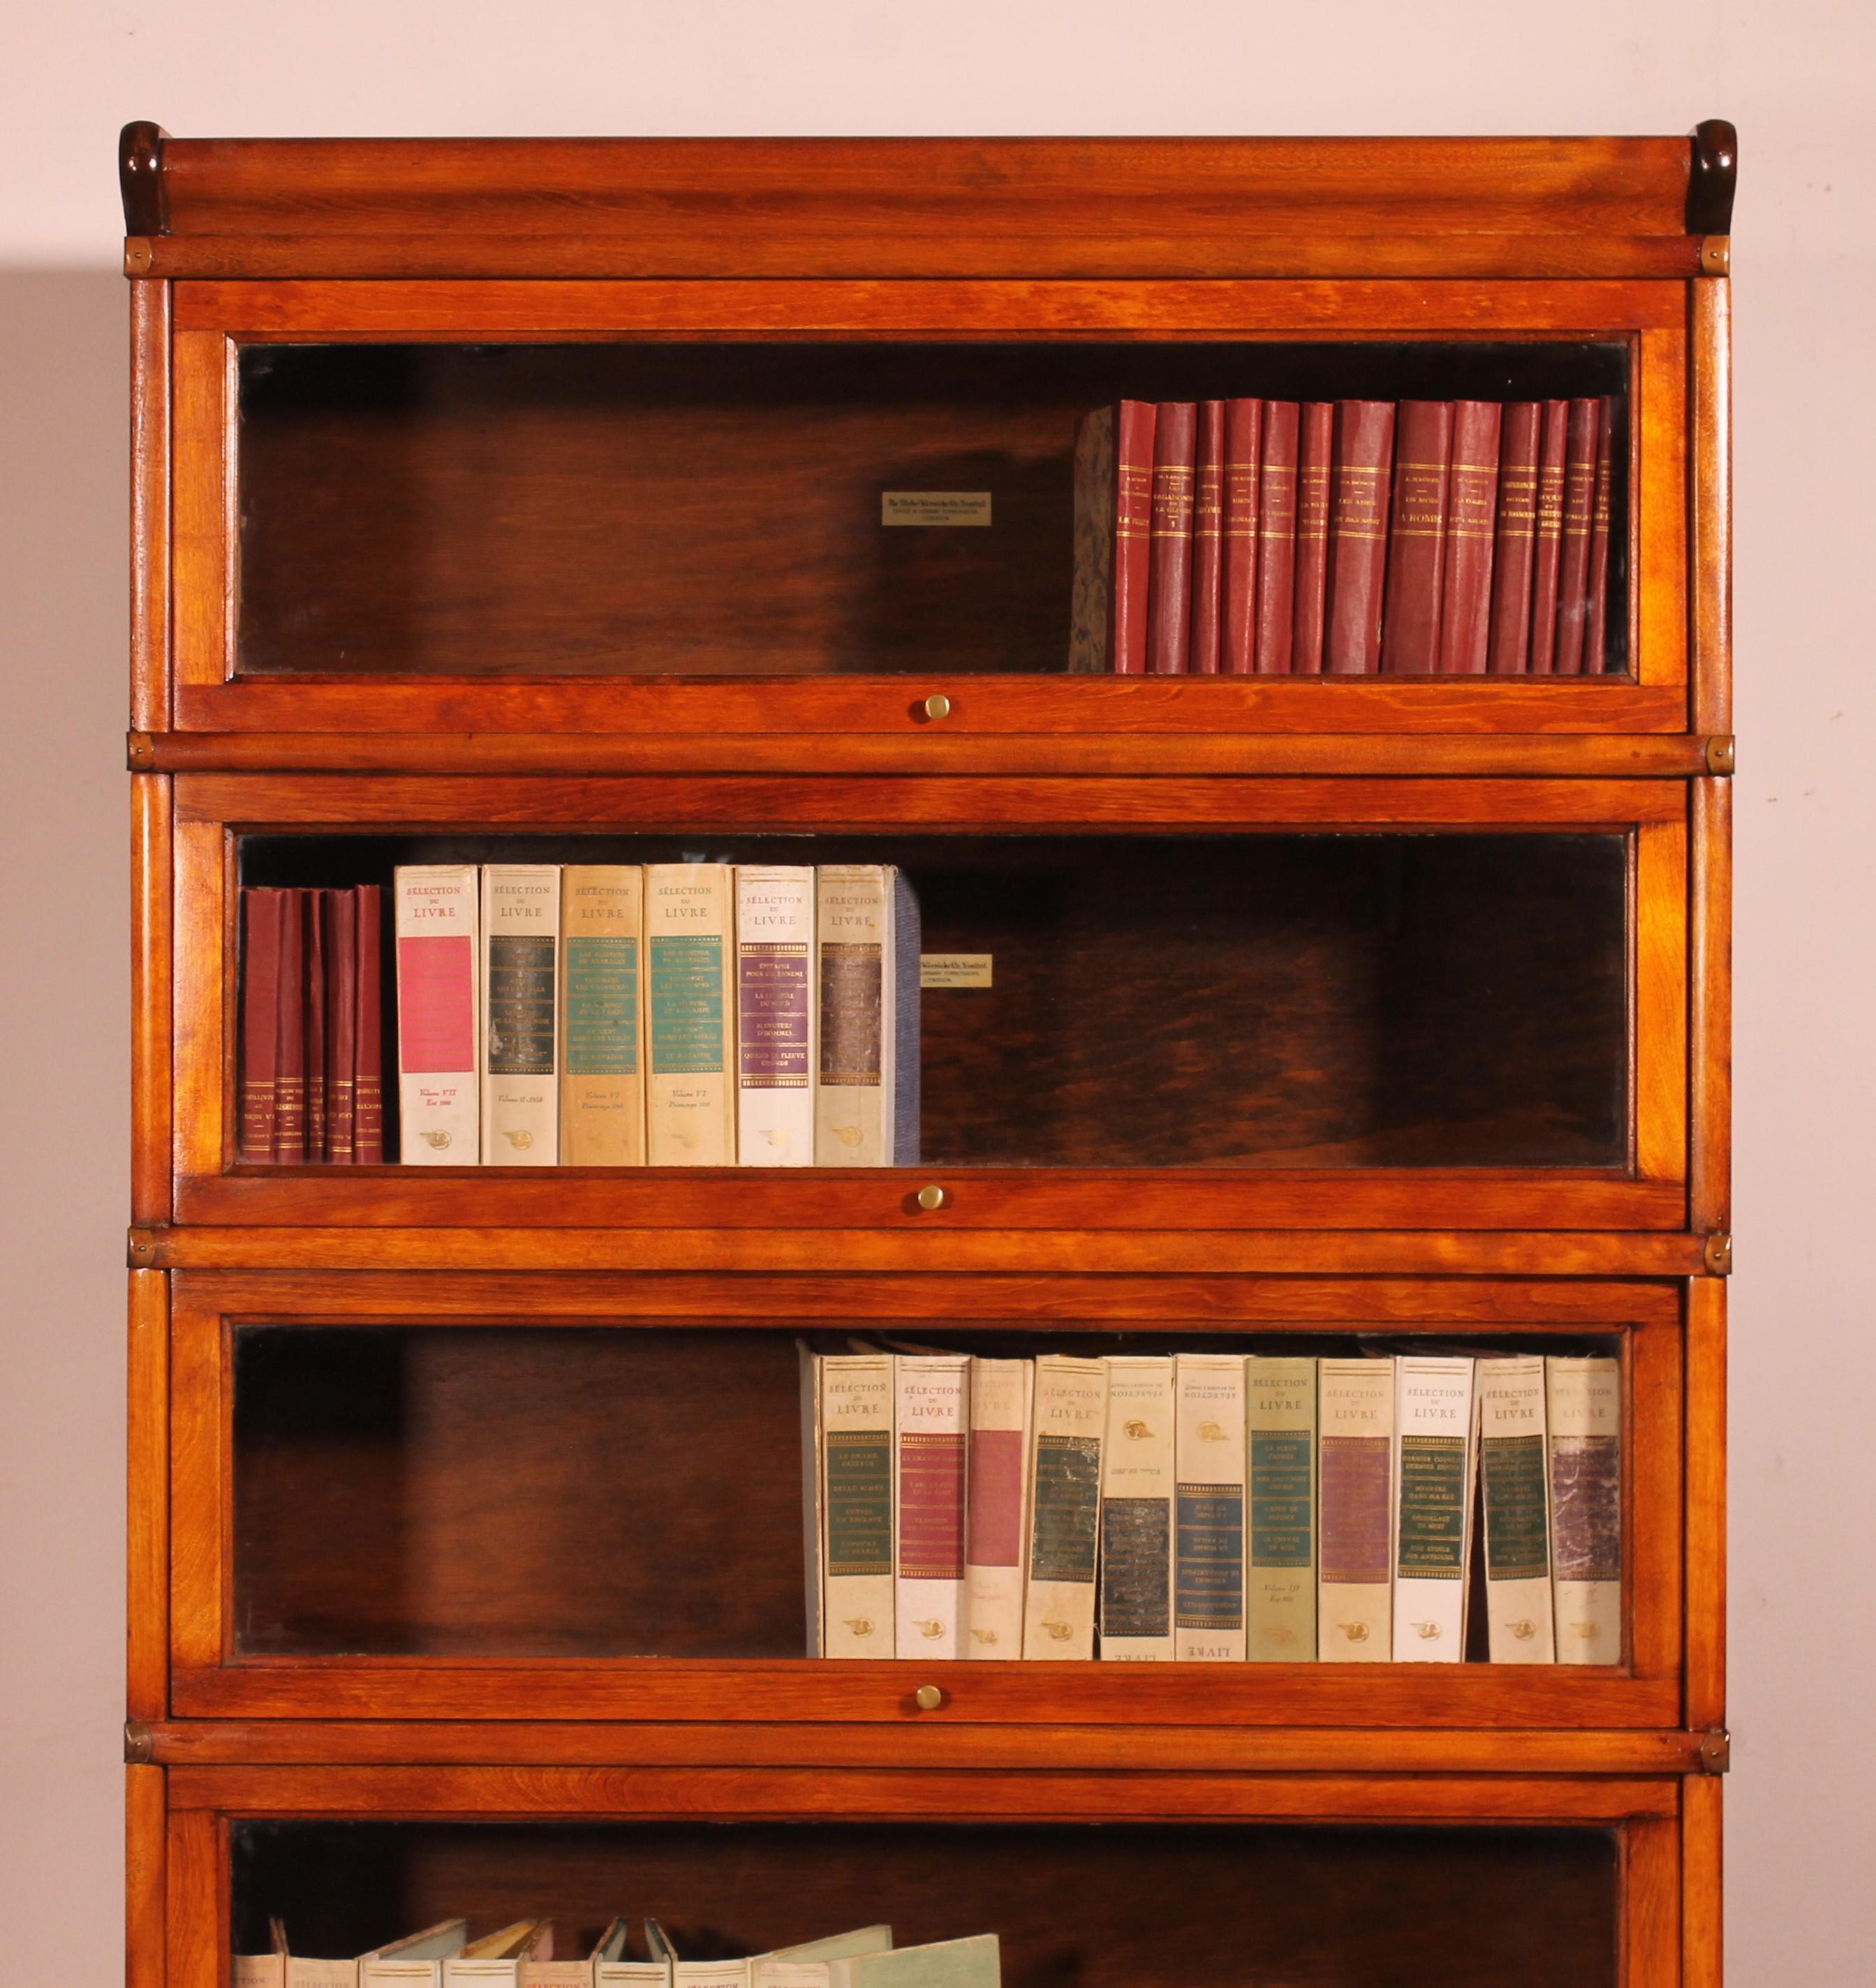 Fruitwood Globe Wernicke Bookcase In Fruit Wood Of 5 Elements With Drawer For Sale